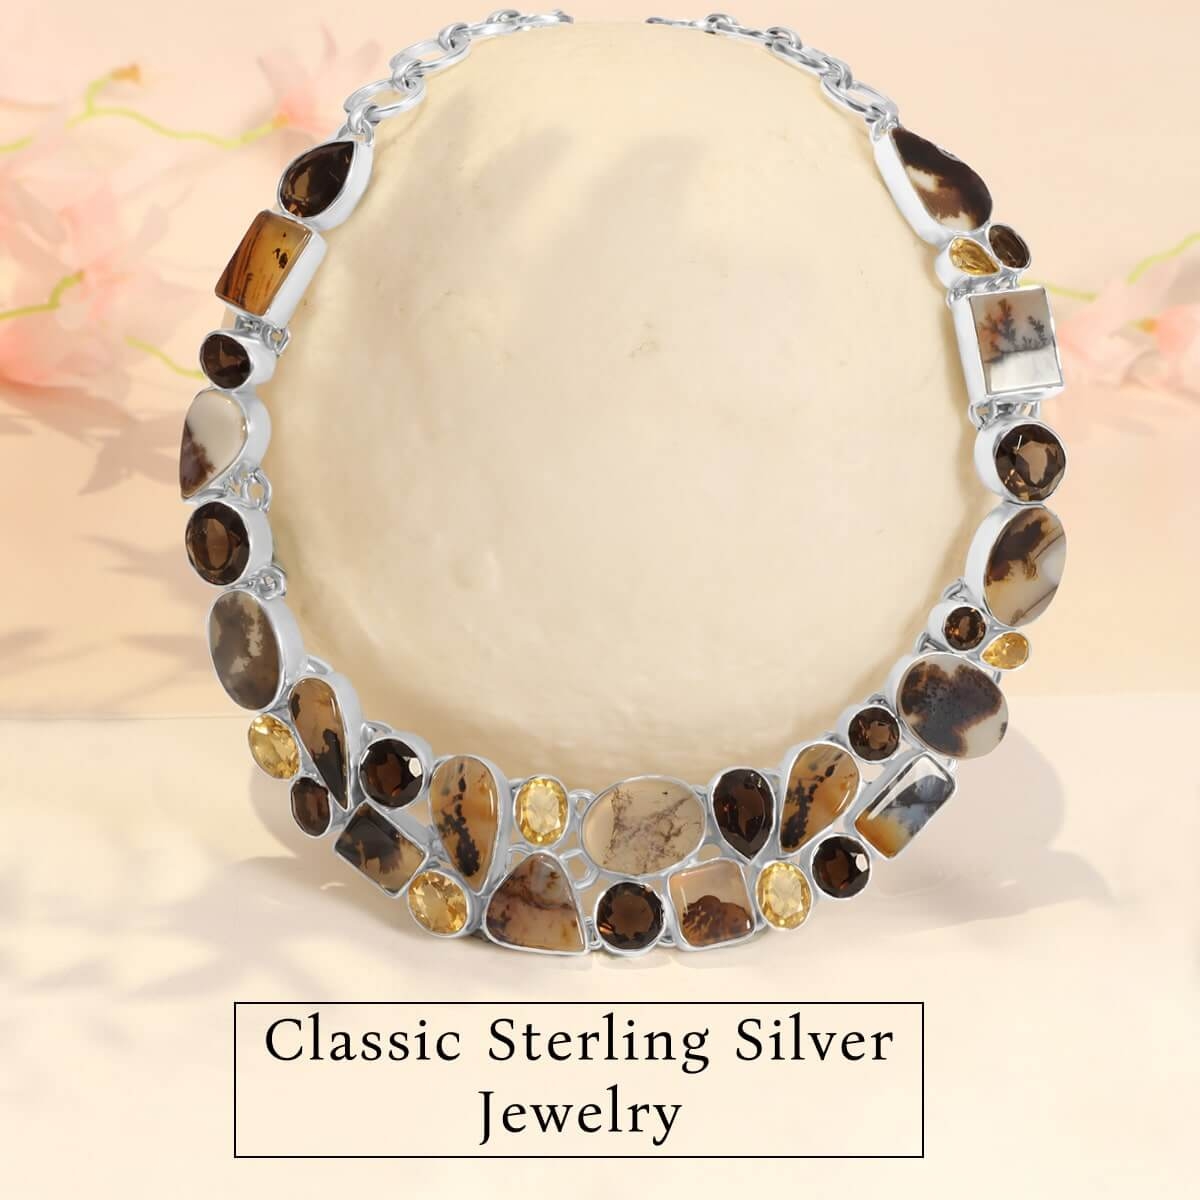 What is Sterling Silver Jewelry?